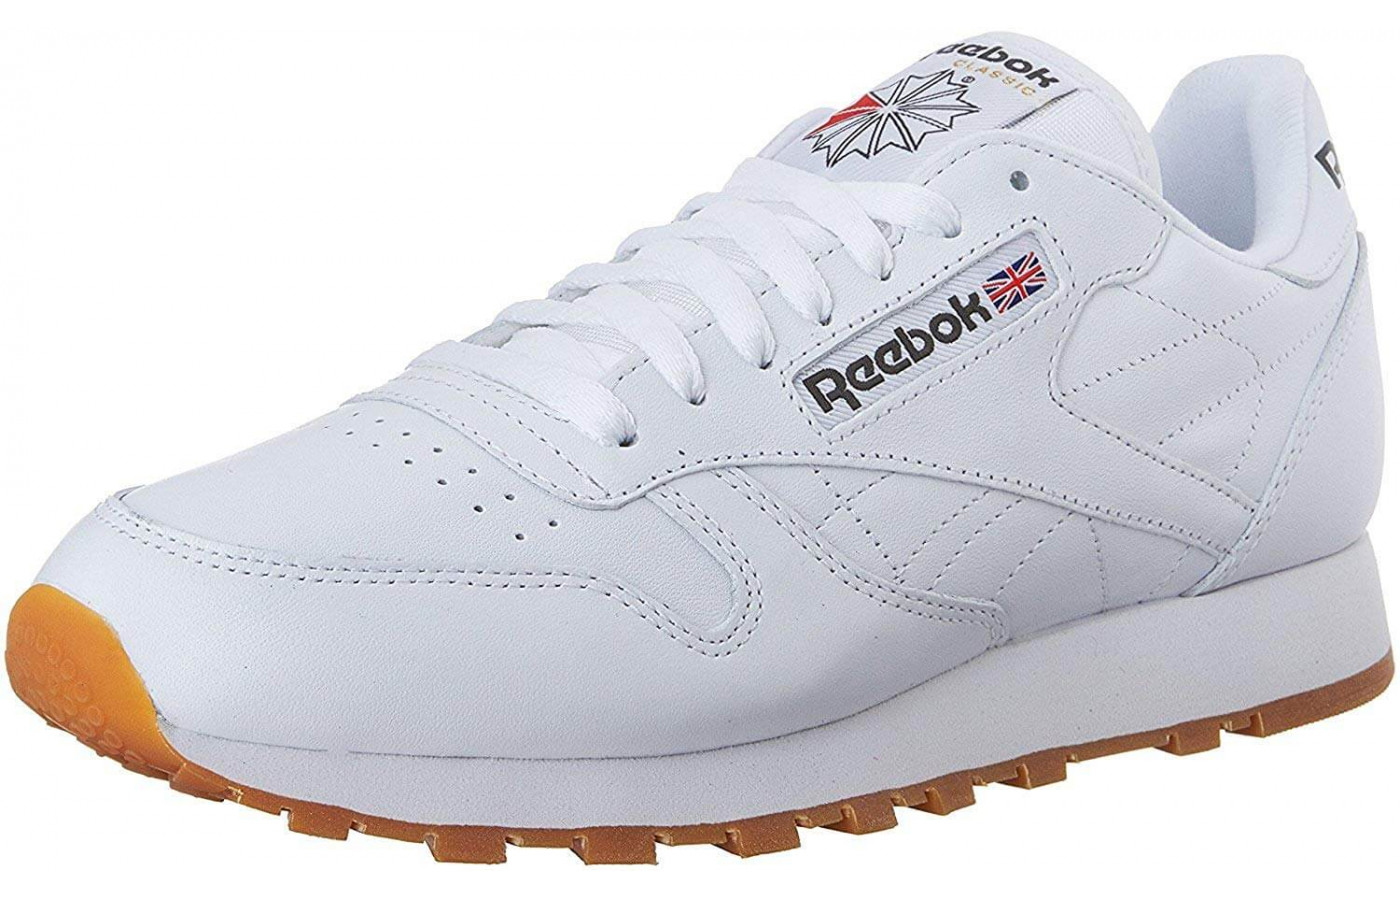 Are Reebok Classics Good for Walking?